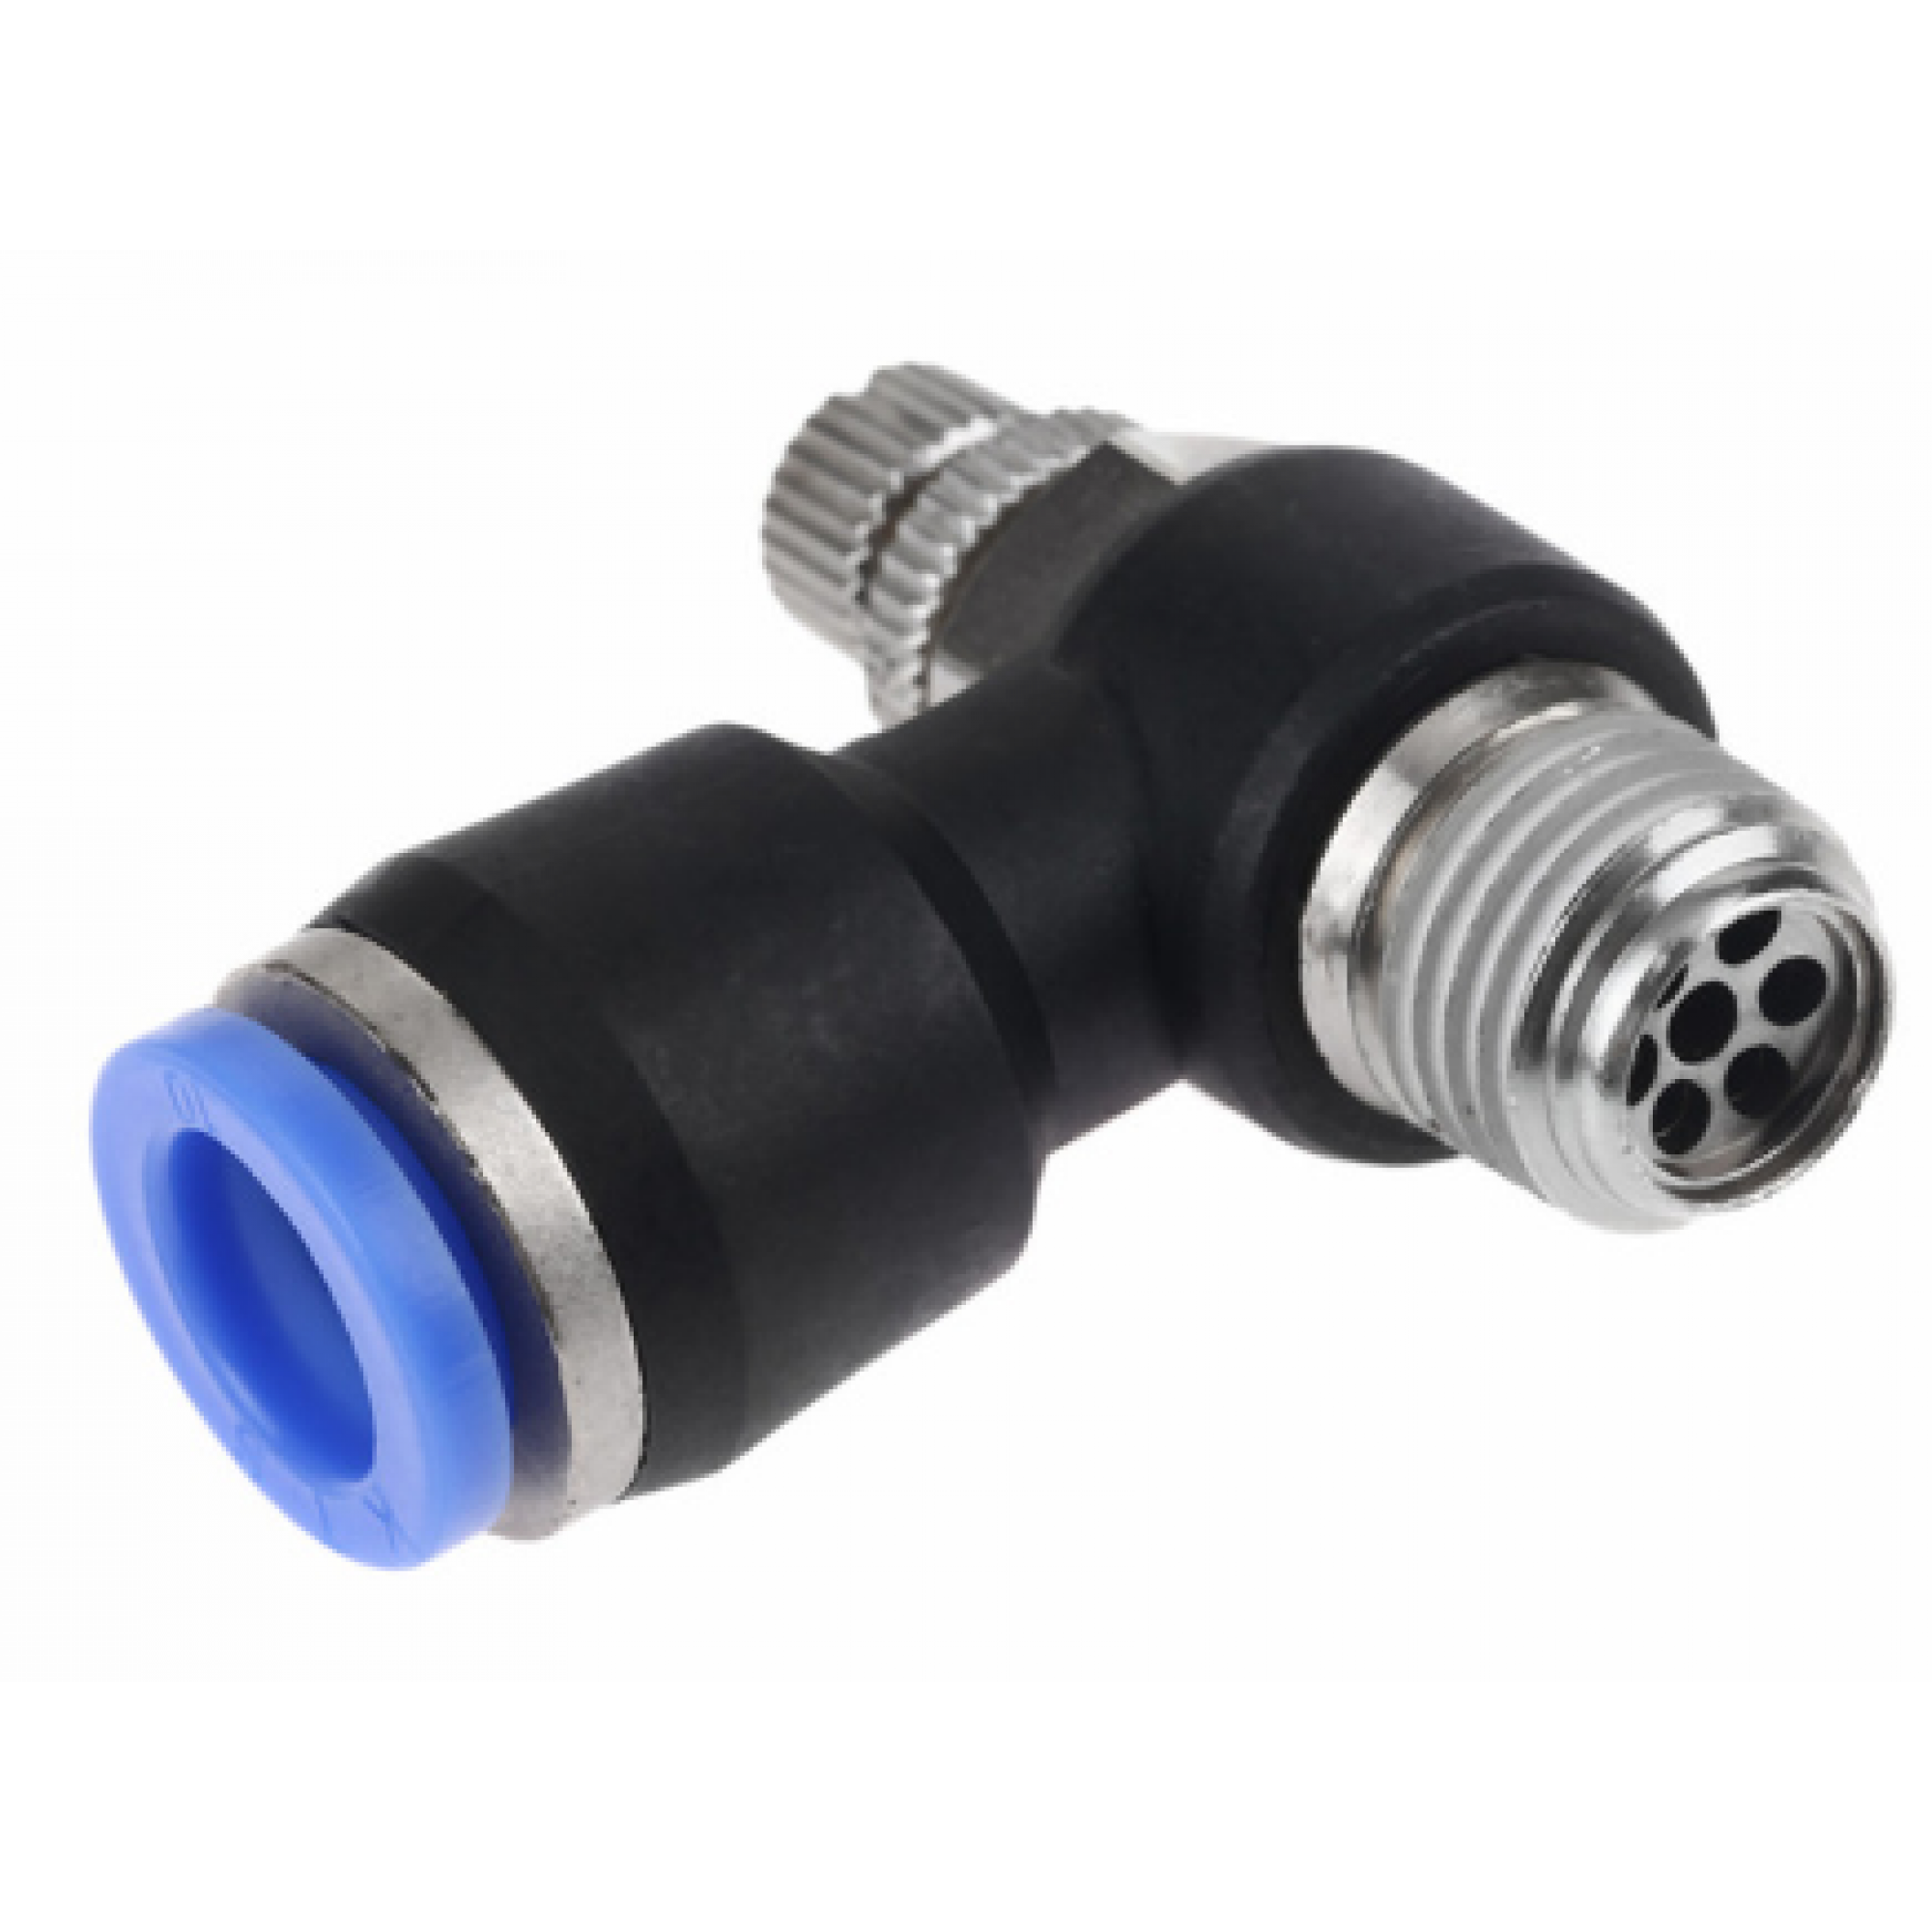 1x Air Flow Speed Control Valve Tube Pneumatic Push In Fitting SL6-M5 5mm 